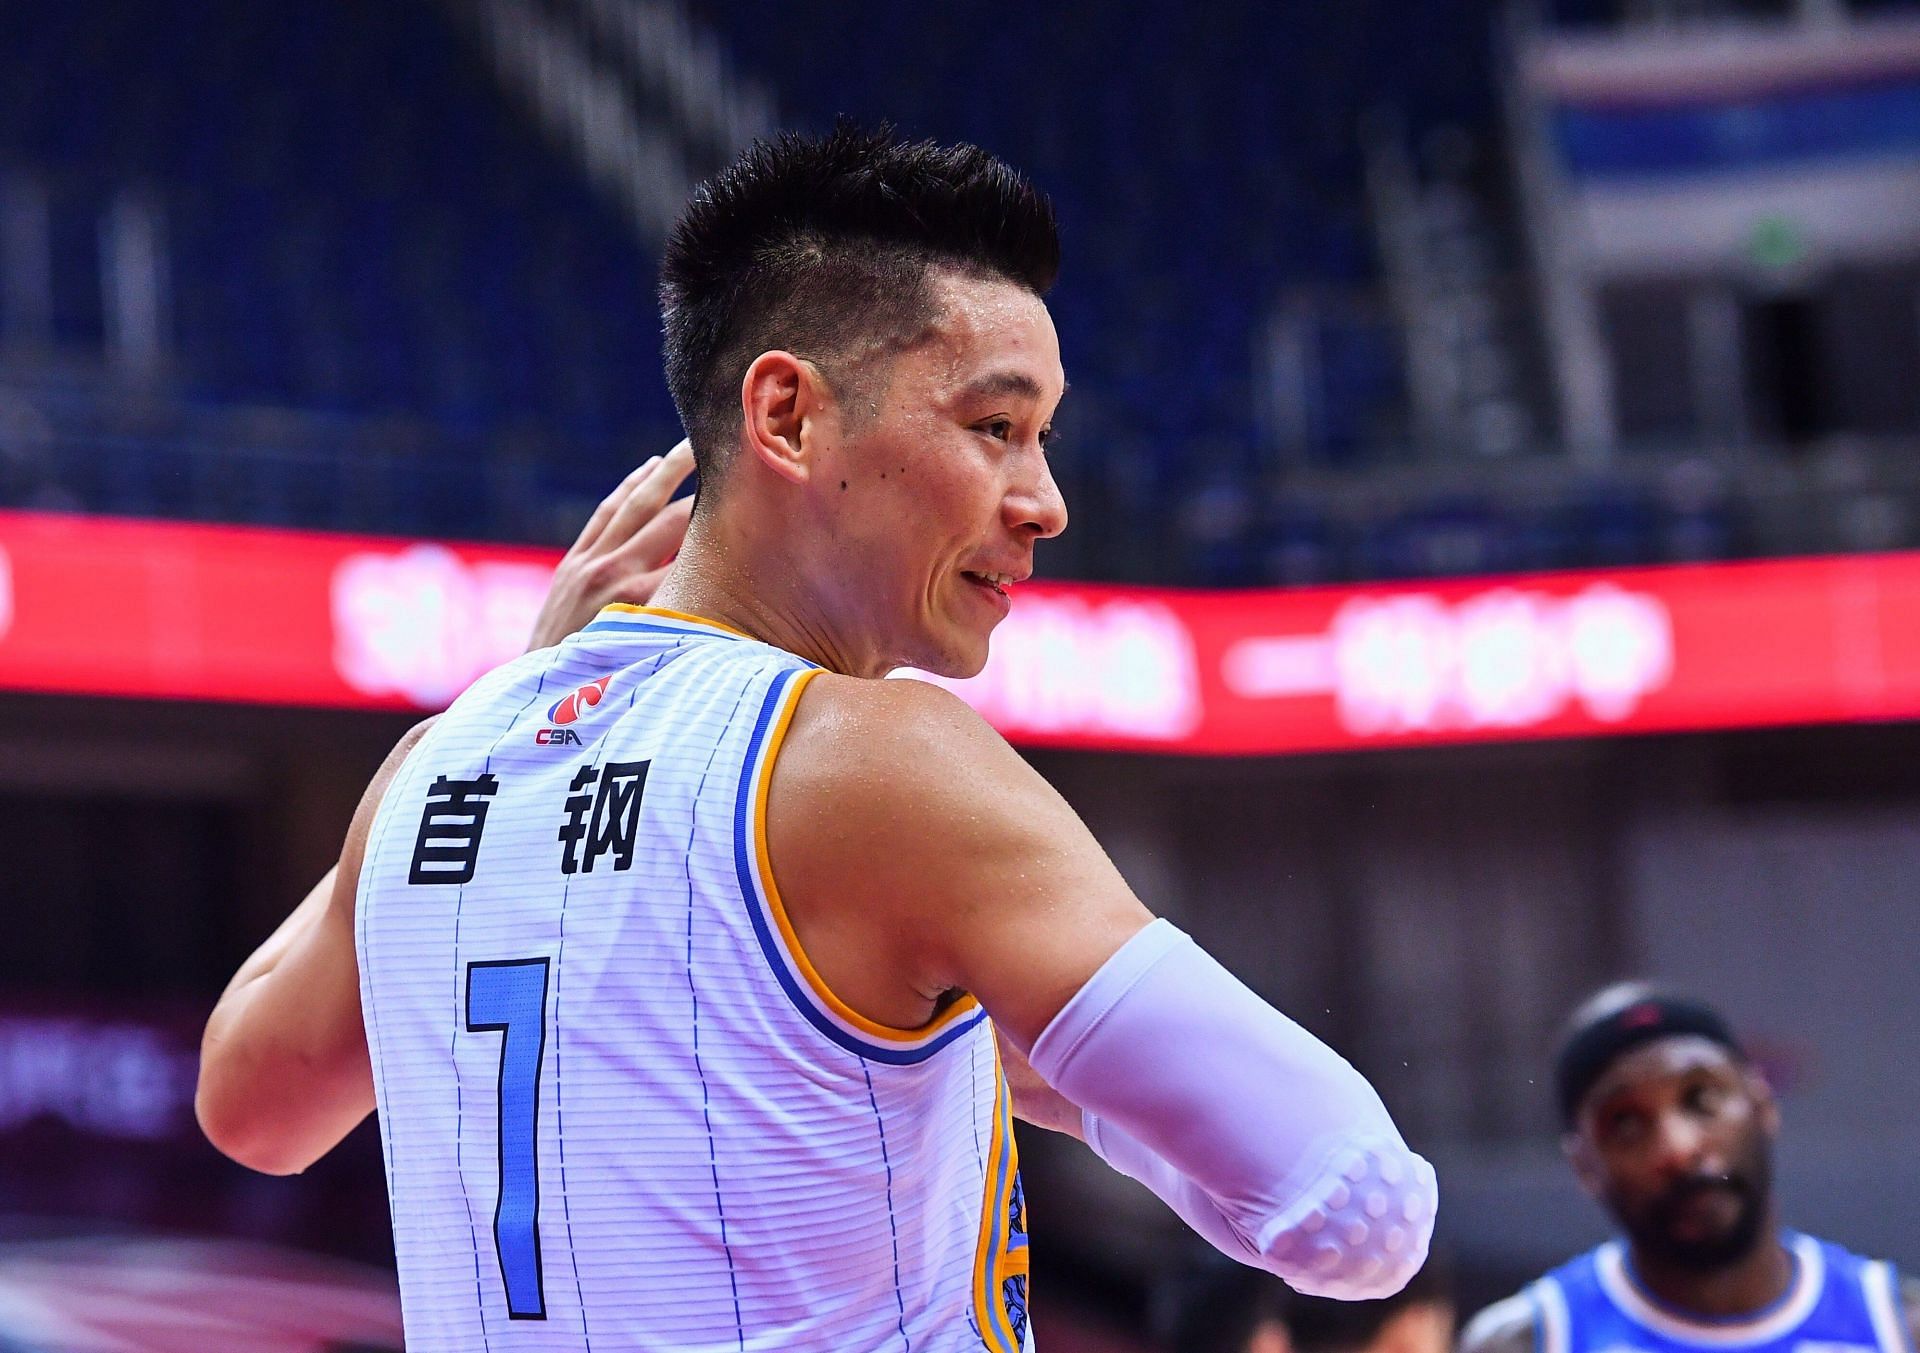 Jeremy Lin of the Guangzhou Loong Lions